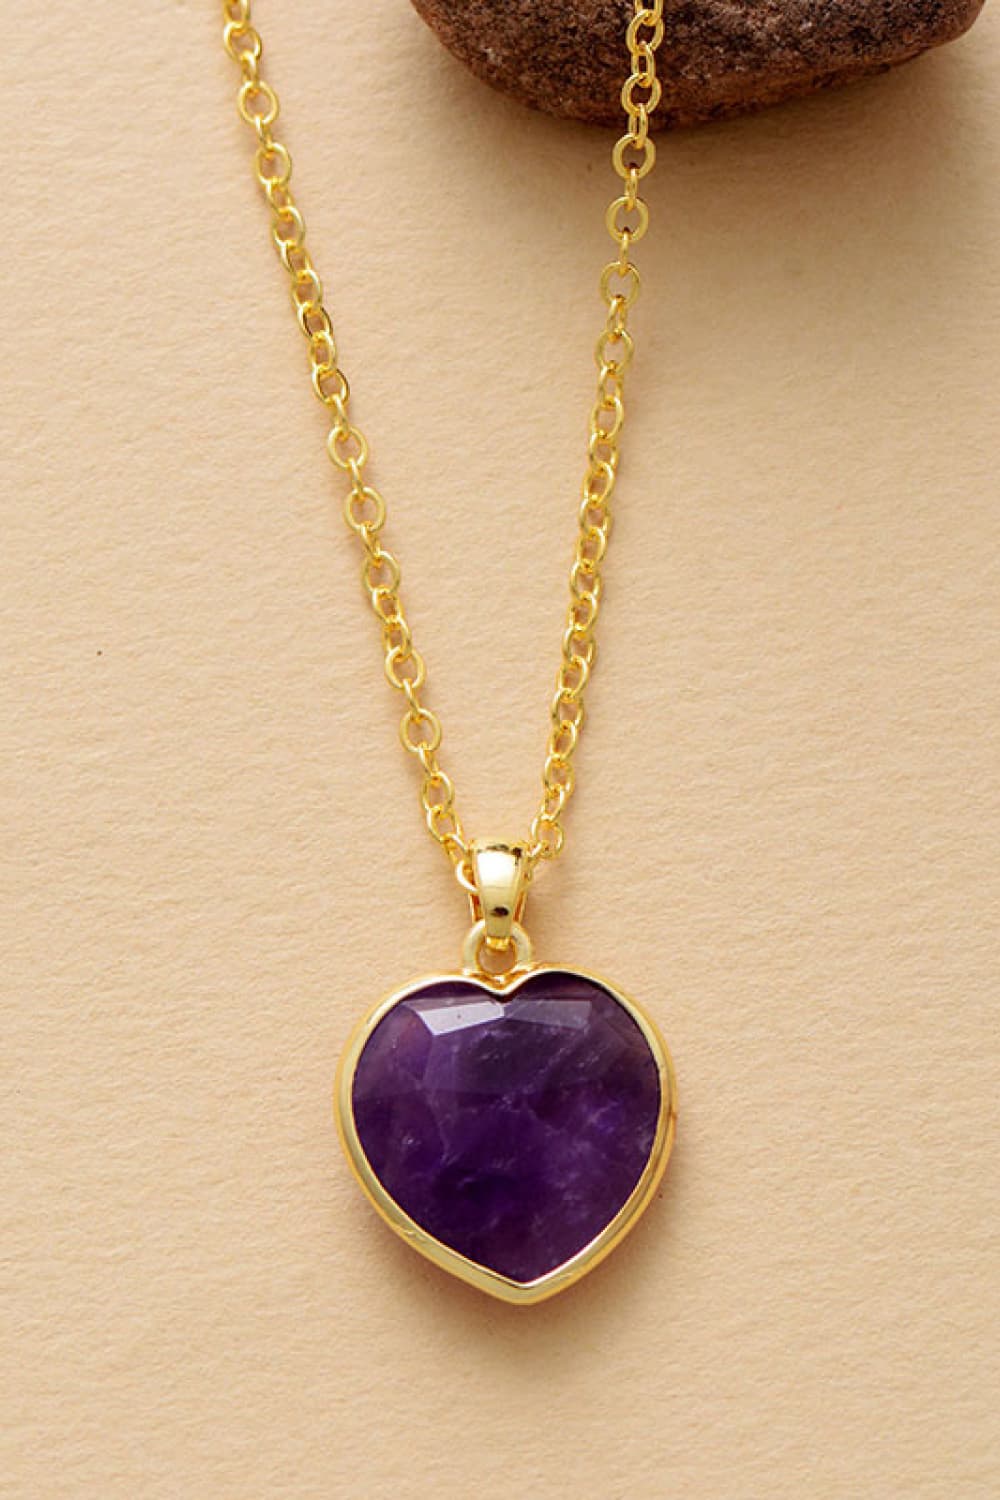 "Elevate Your Style and Heartfelt Connection with the Unique Kulture Natural Stone Heart Pendant Necklace. Meticulously crafted, this necklace showcases a stunning natural stone heart pendant that embodies both elegance and emotional significance. The carefully selected beads gracefully accentuate the pendant, resulting in a perfect fusion of style and sentiment. Embrace a distinctive look while symbolizing your deep-rooted emotions with this exquisite heart pendant necklace from Unique Kulture."